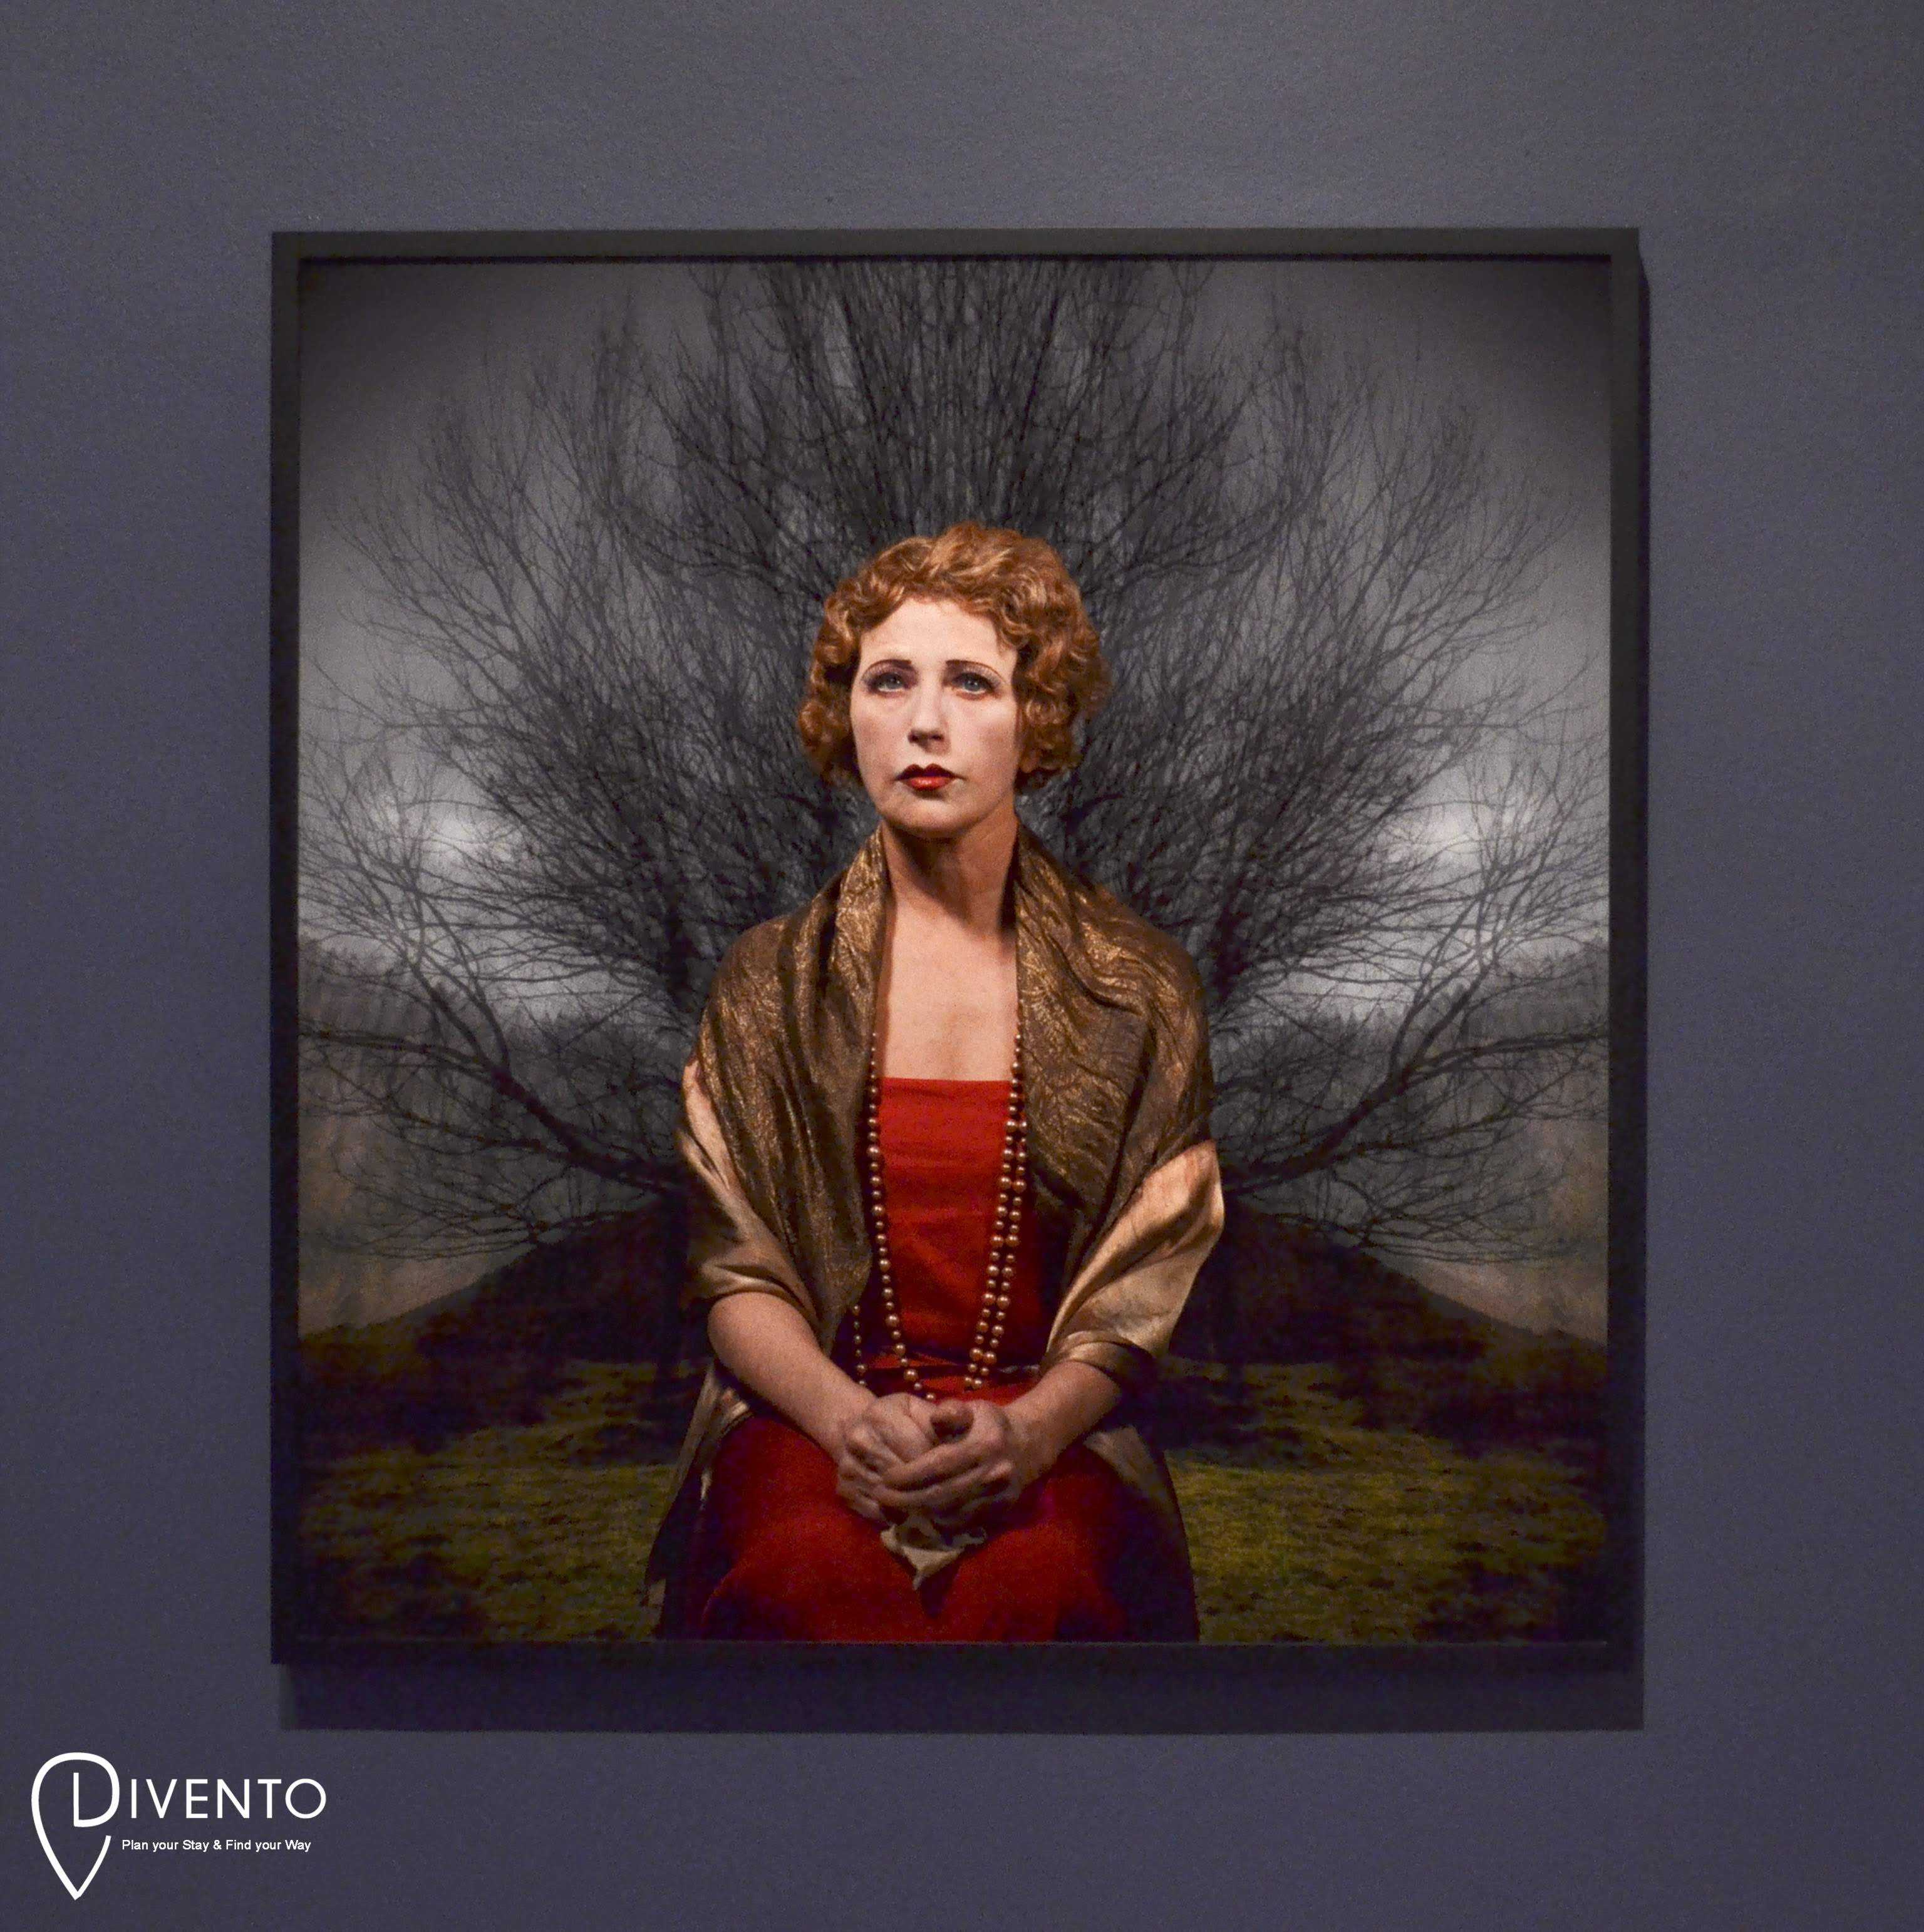 Cindy Sherman, Exhibition, National Portrait Gallery, Charing Cross, London: 27 June 2019 - 15 September 2019